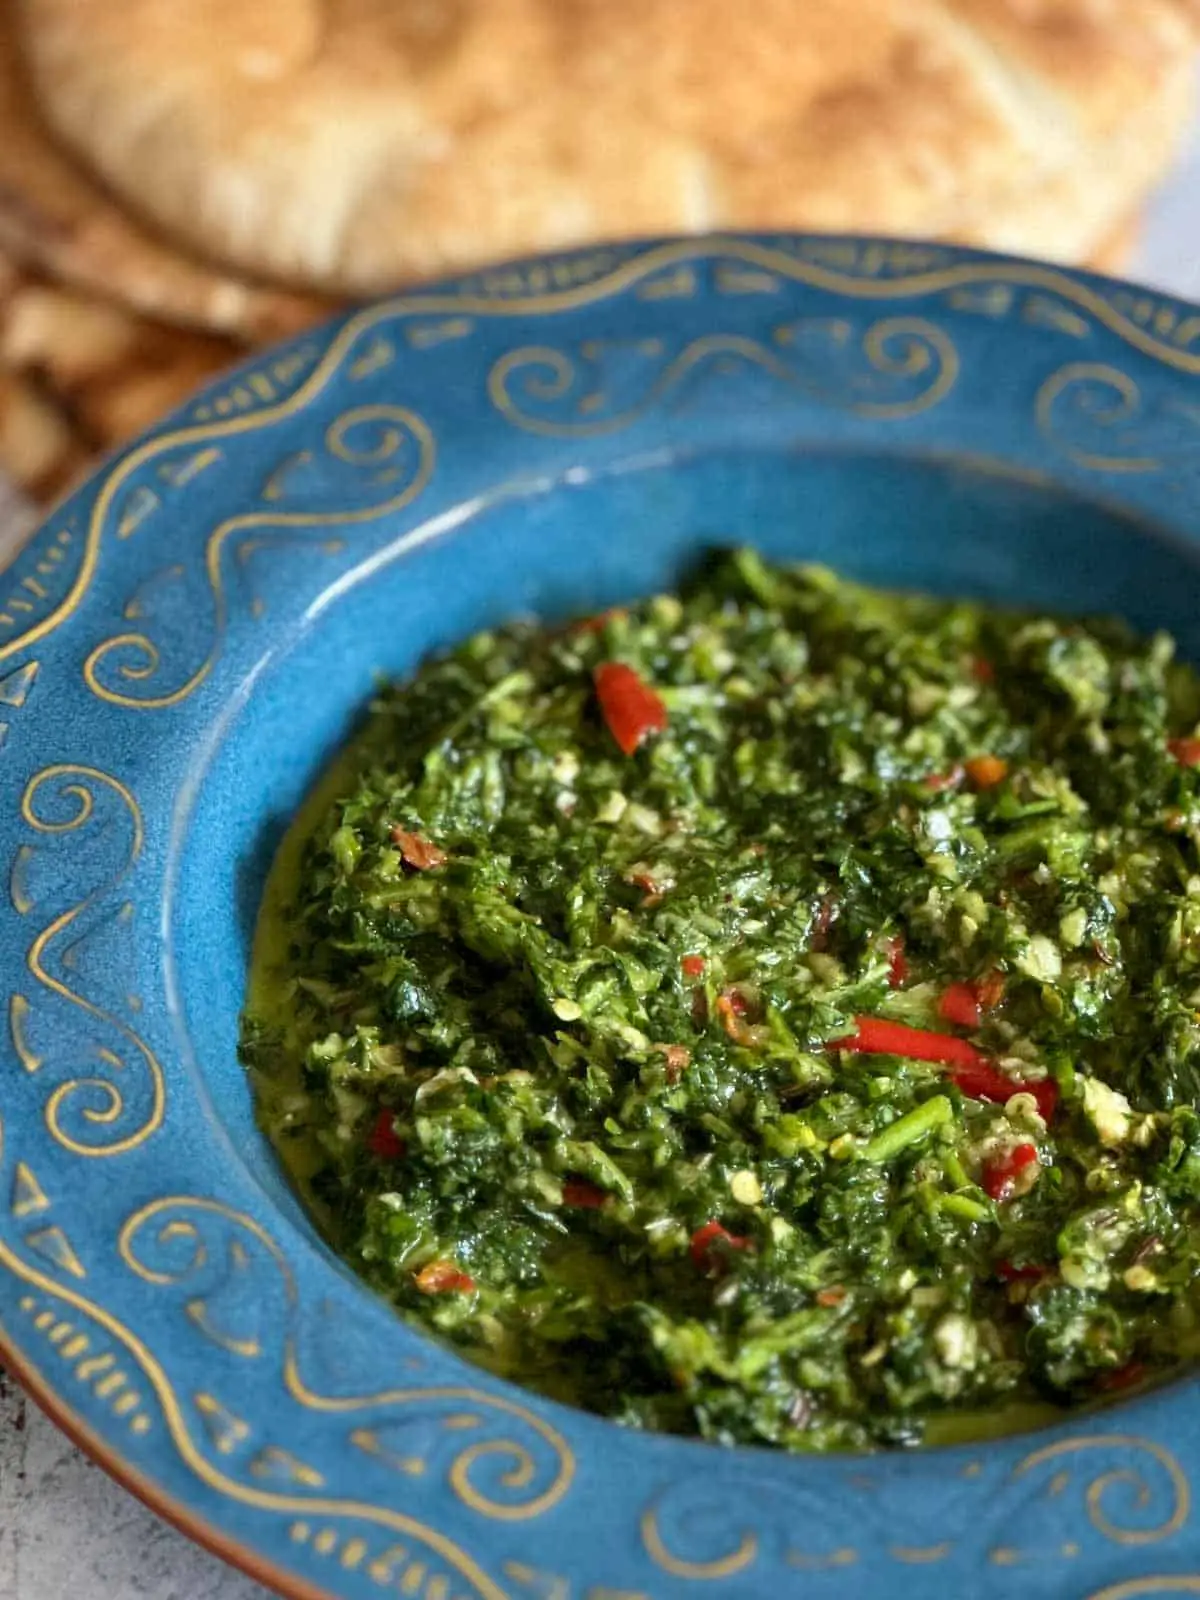 A blue bowl containing zhoug sauce which is blended cilantro with garlic, chilis, and seasonings. There are some pita breads in the background.